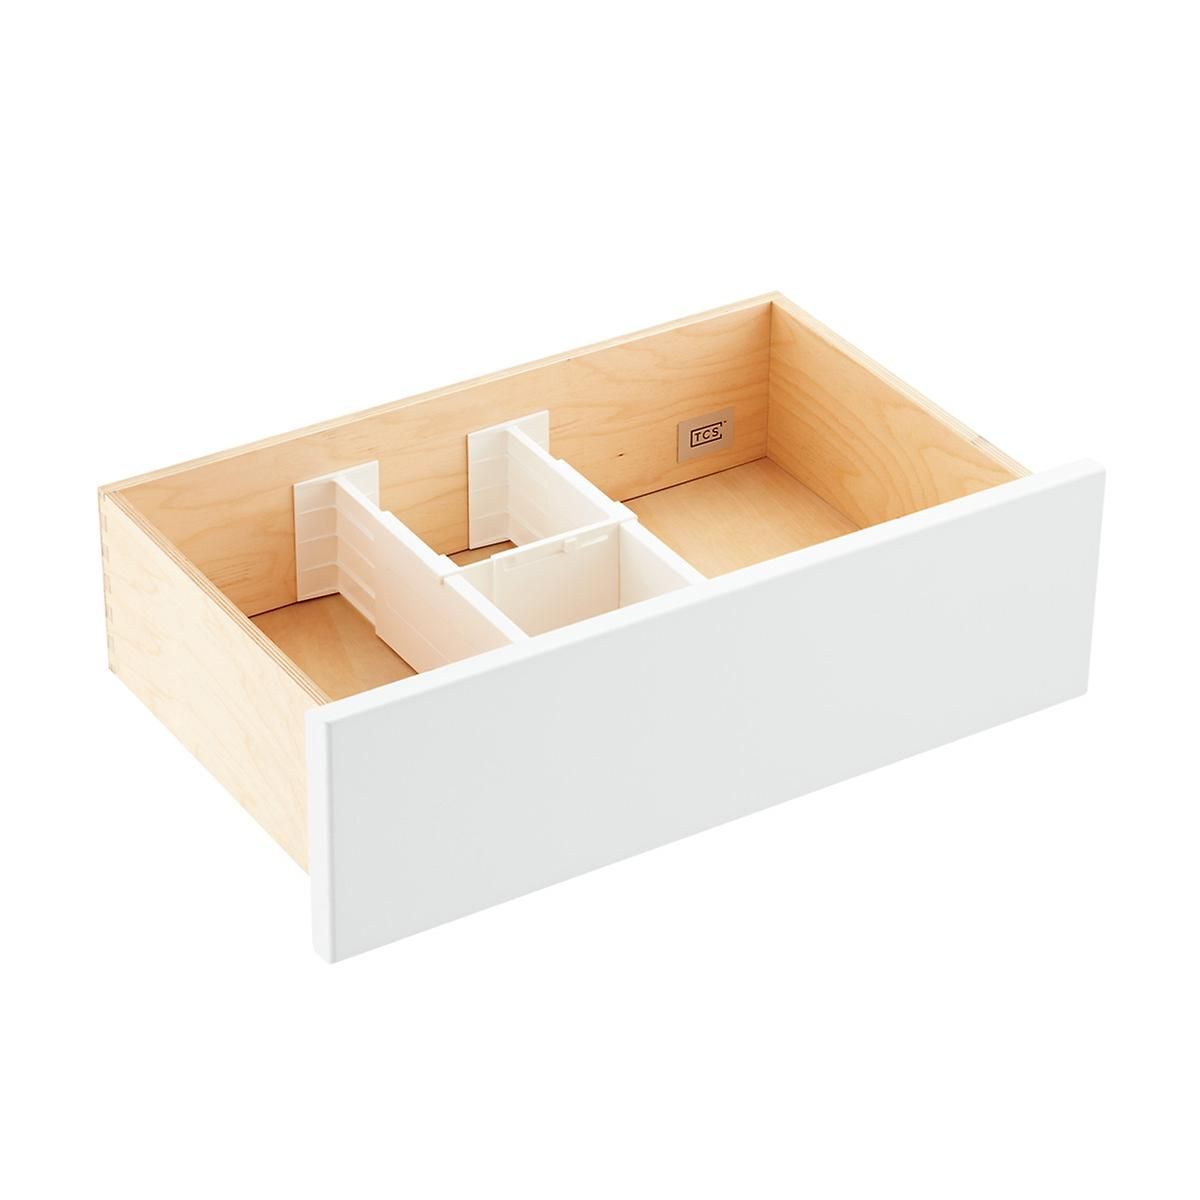 4" Dream Drawer Organizers | The Container Store